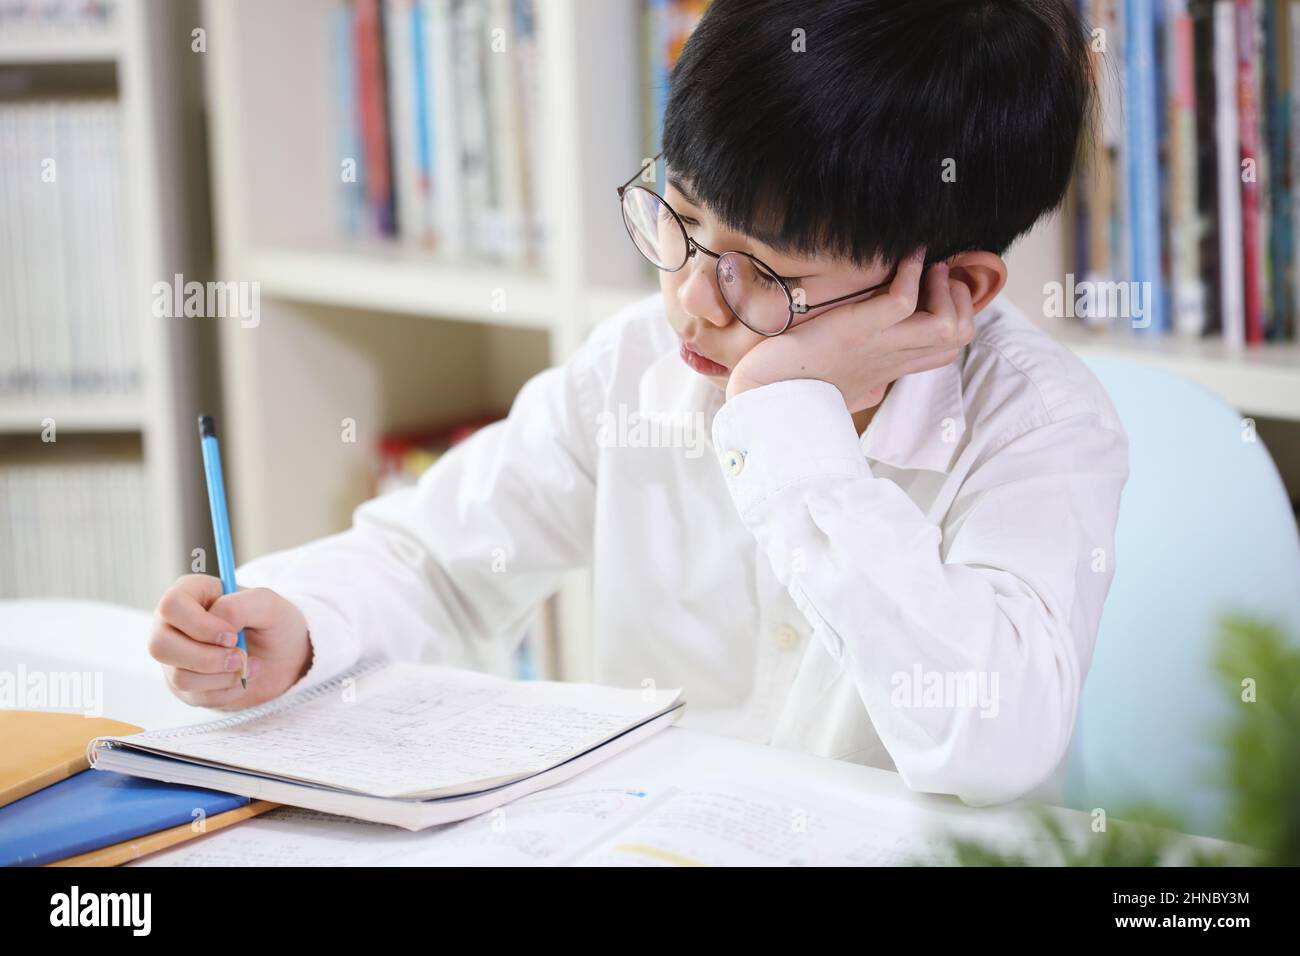 A child who is tired of boring school homework and studying is studying hard by taking notes in a notebook even though he is tired. Stock Photo